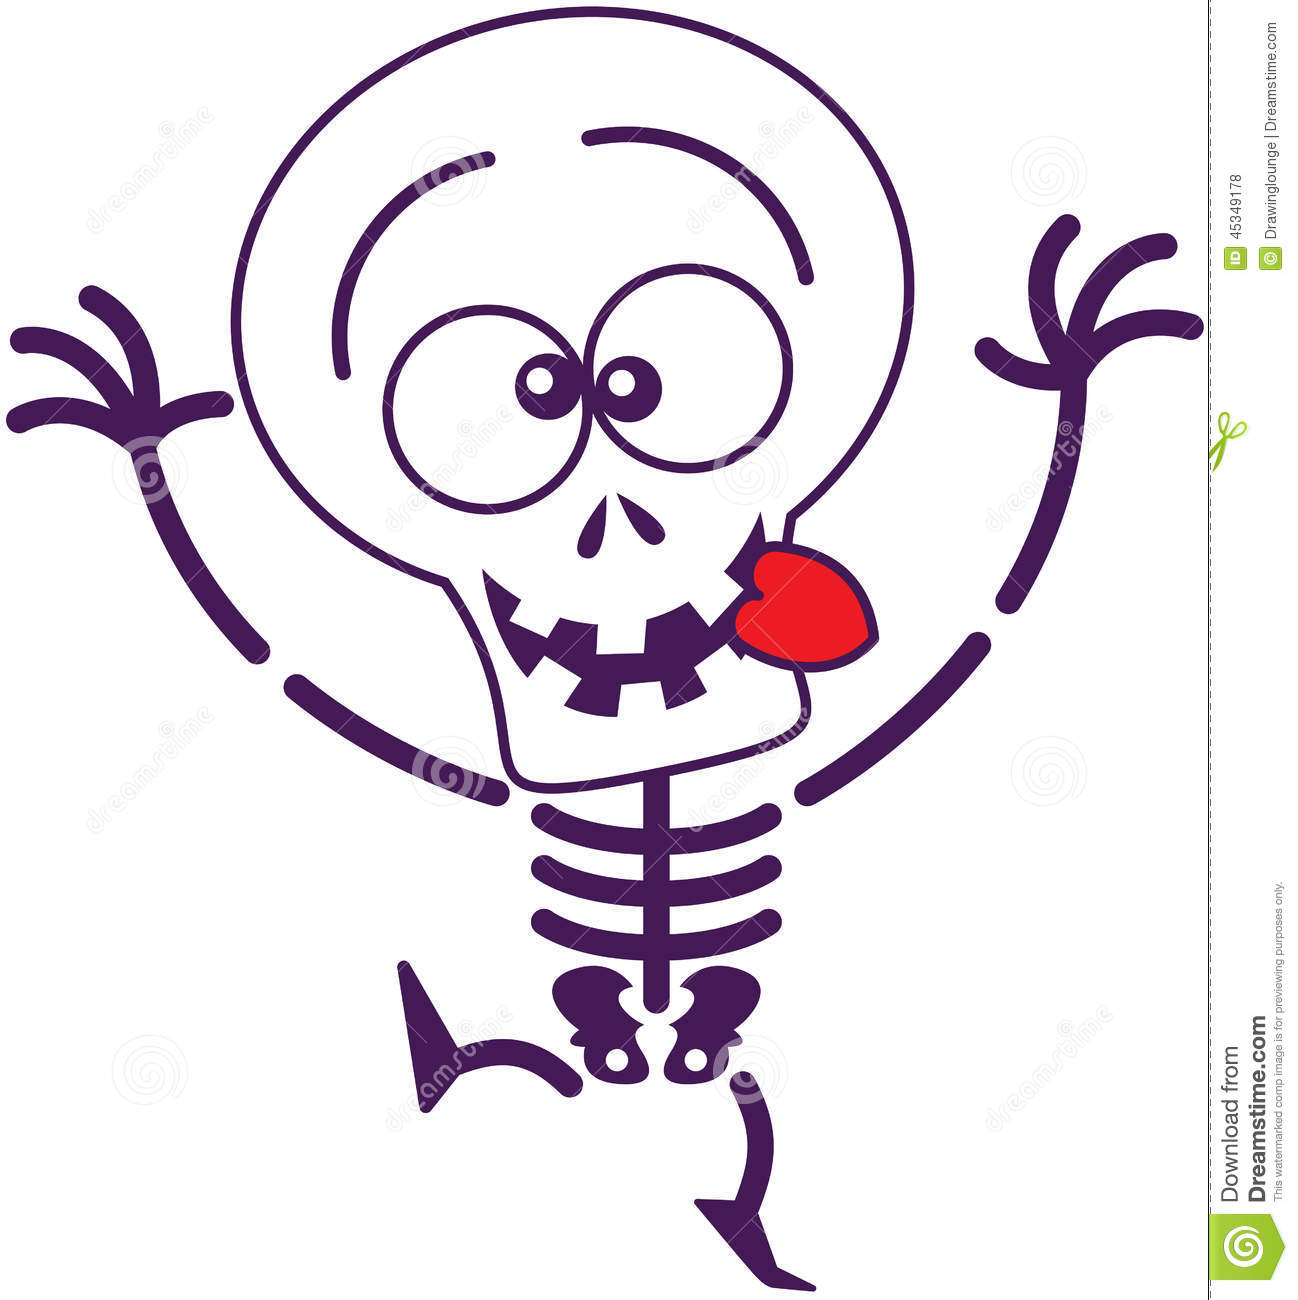 Funny Skeleton With Big Head Bulging Eyes And Missing Teeth While